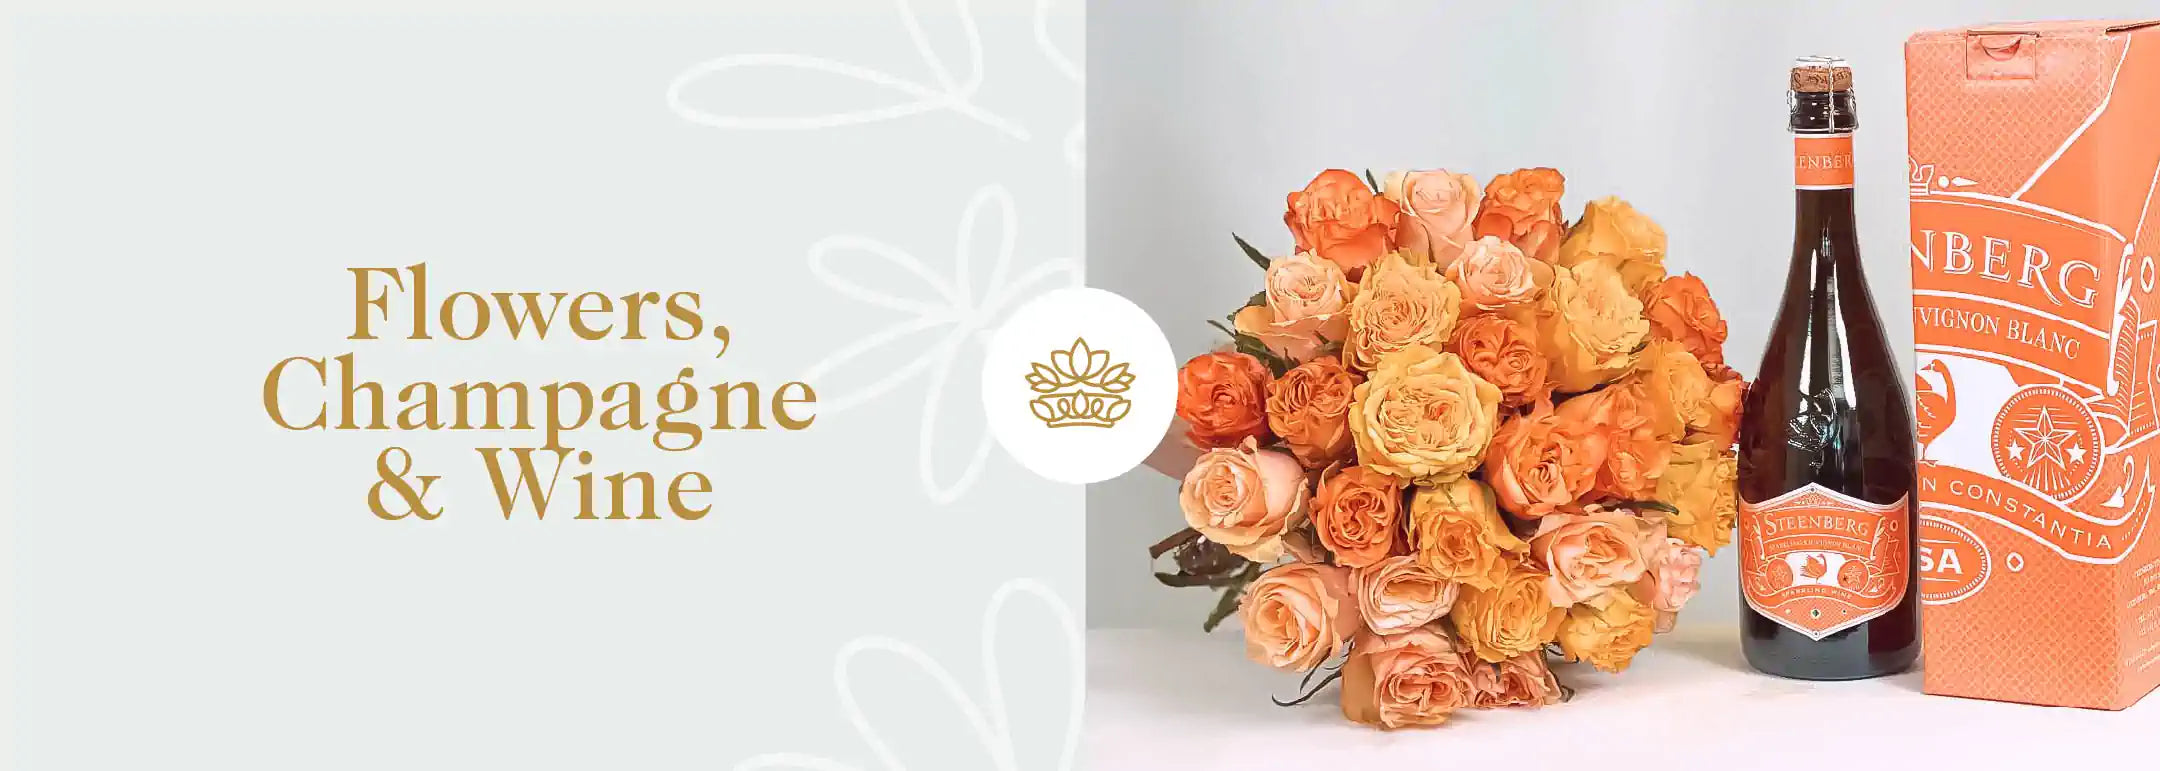 A sumptuous cluster of peach-toned roses poised beside a bottle of Steenberg Sauvignon Blanc, complemented by an elegant box, set against a pale backdrop with 'Flowers, Champagne & Wine' text and a flower crown emblem - Fabulous Flowers and Gifts.